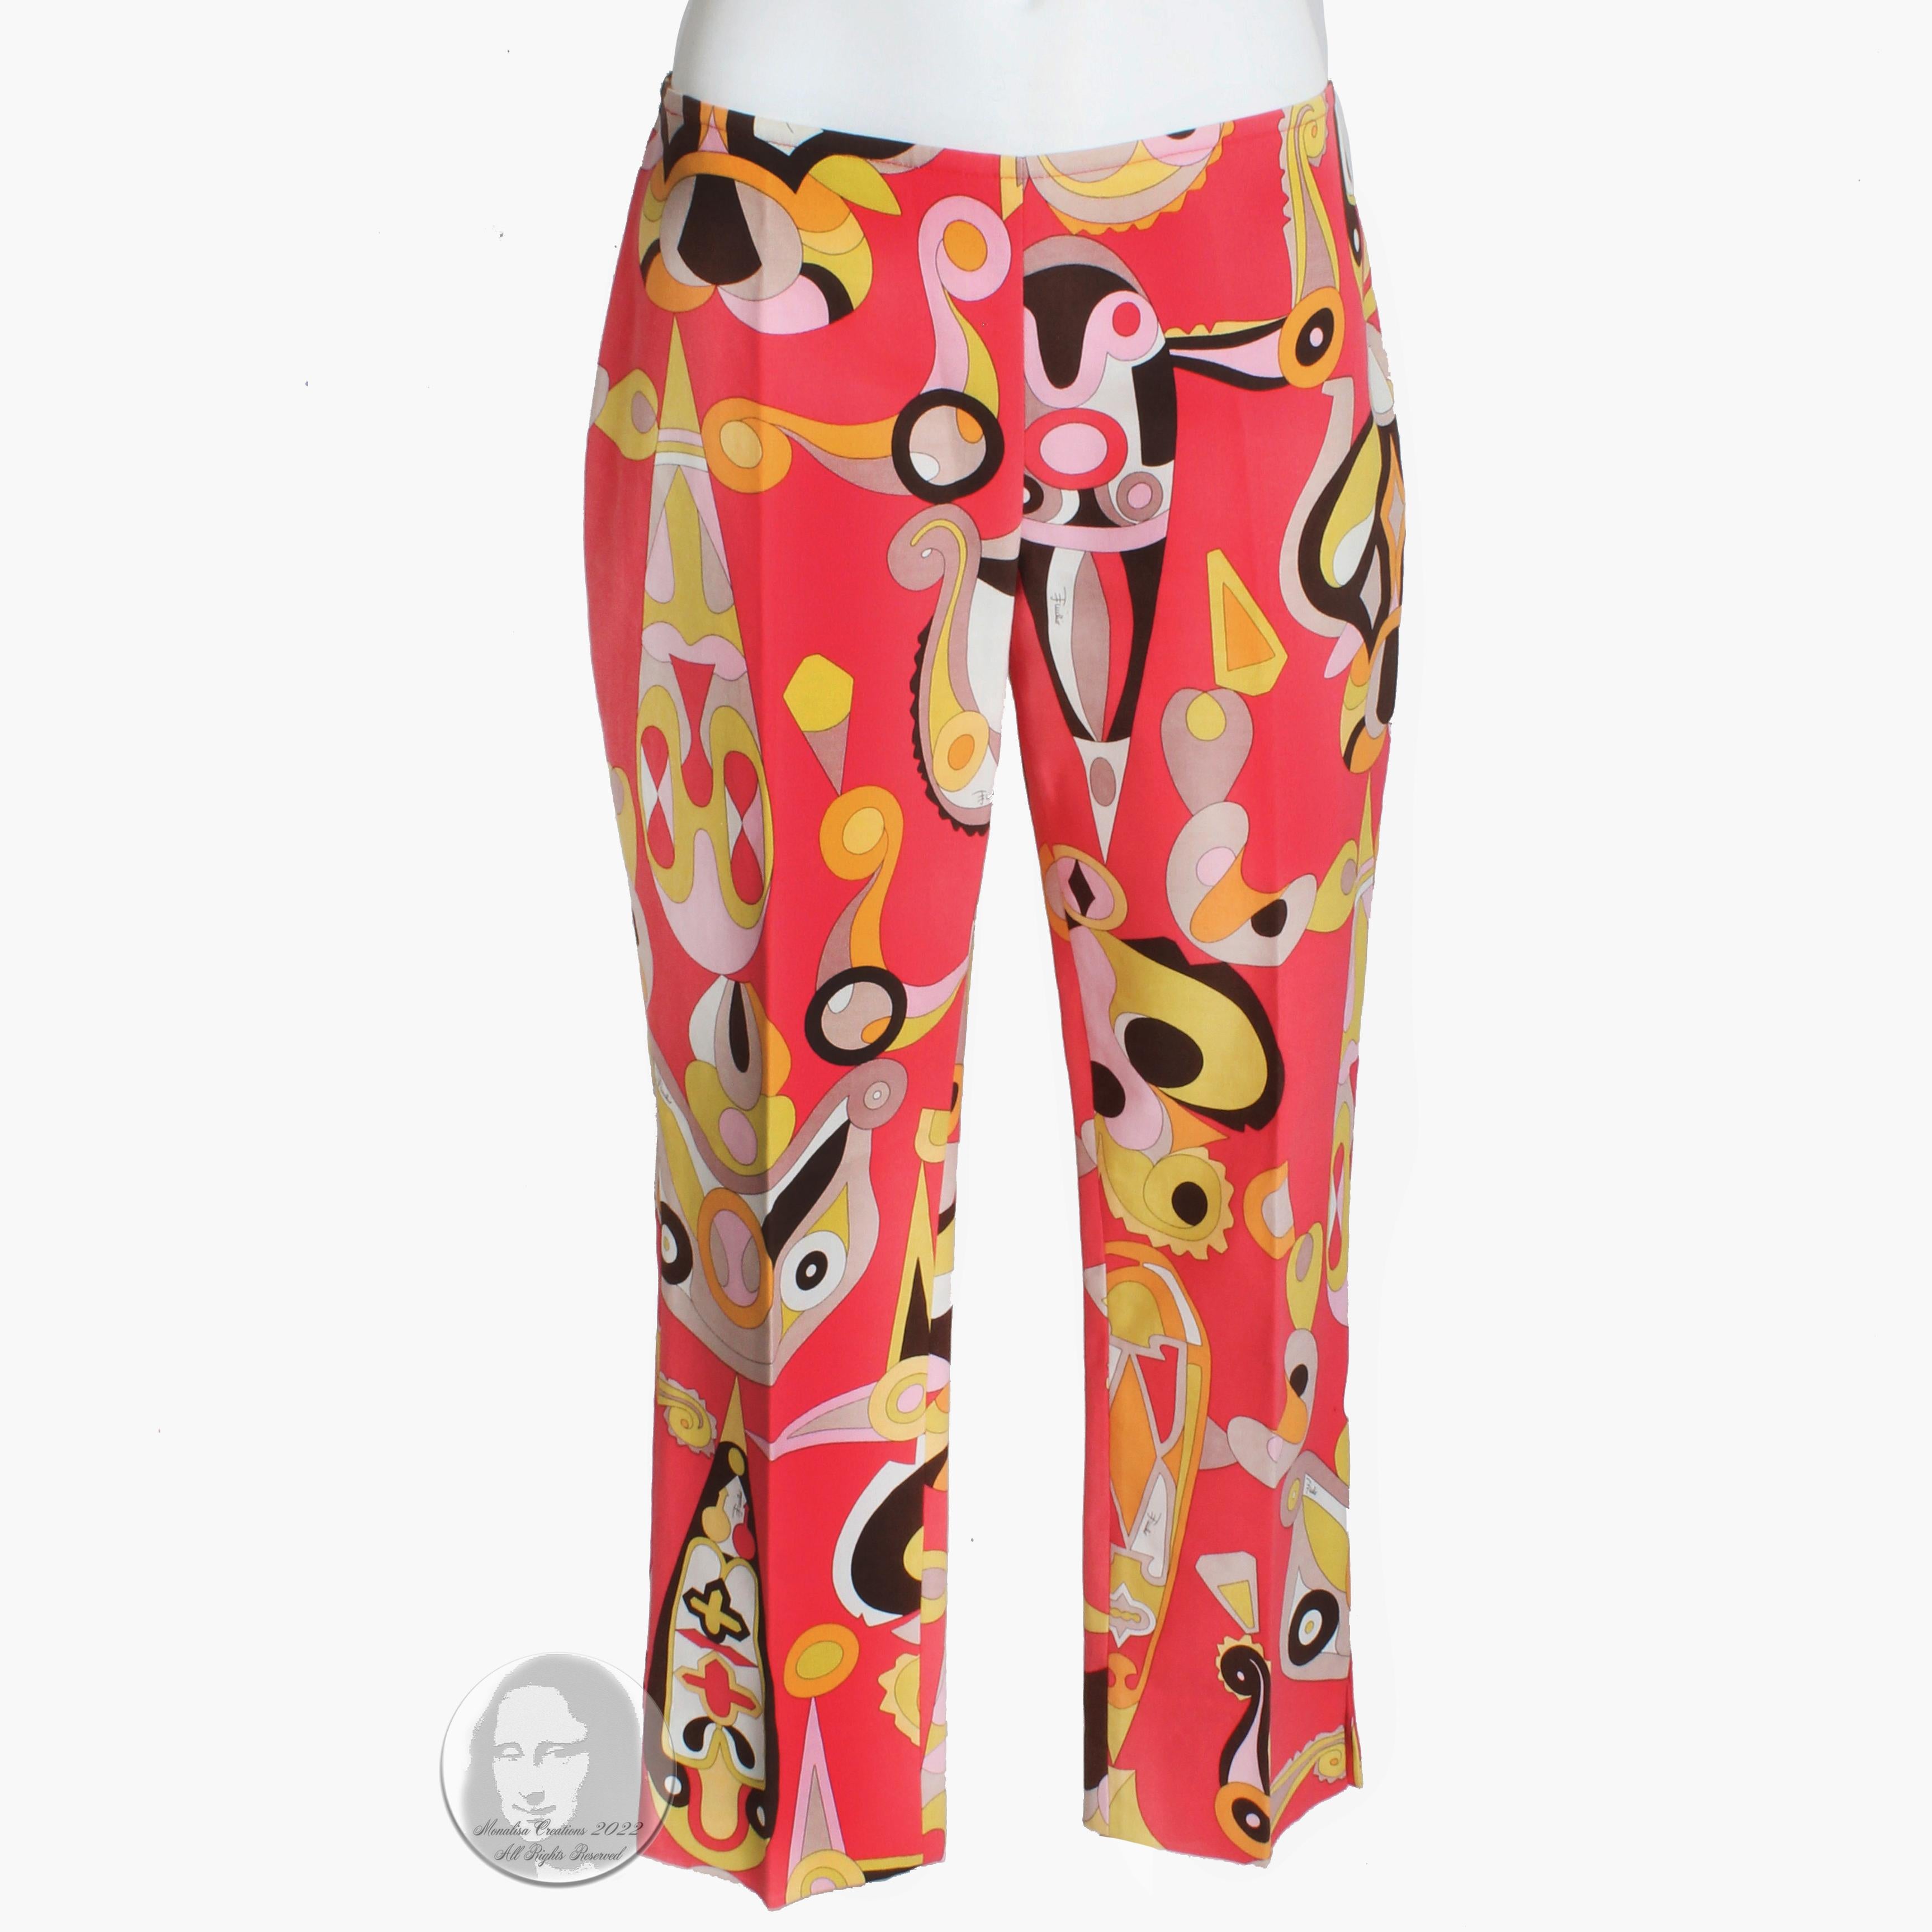 Preowned cropped pants iconic print by Emilio Pucci, likely made in the 2000s. Made from a cotton blend twill fabric, feature a flat front with side zipper, vented hem and a spectacular swirling abstract pattern!

So easy to style and wear, these